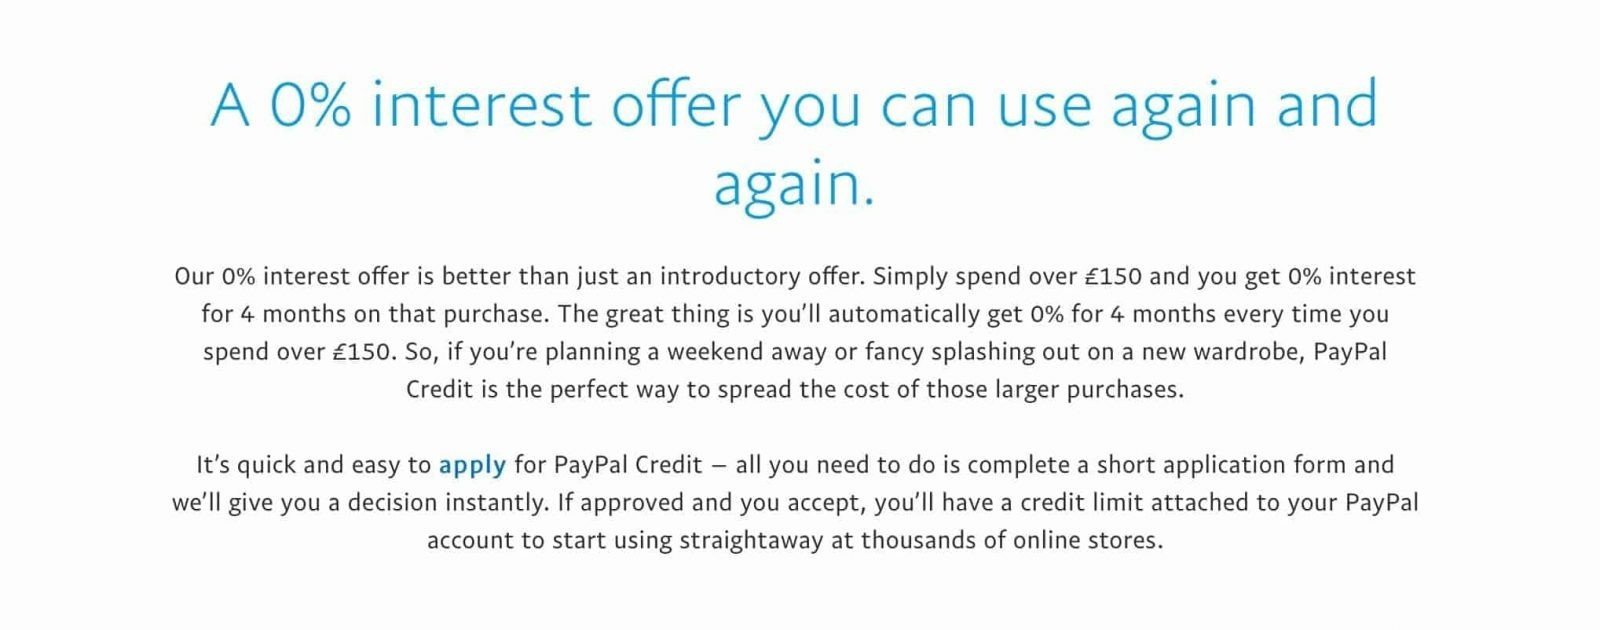 PayPal credit is accepted at Cloud Climax